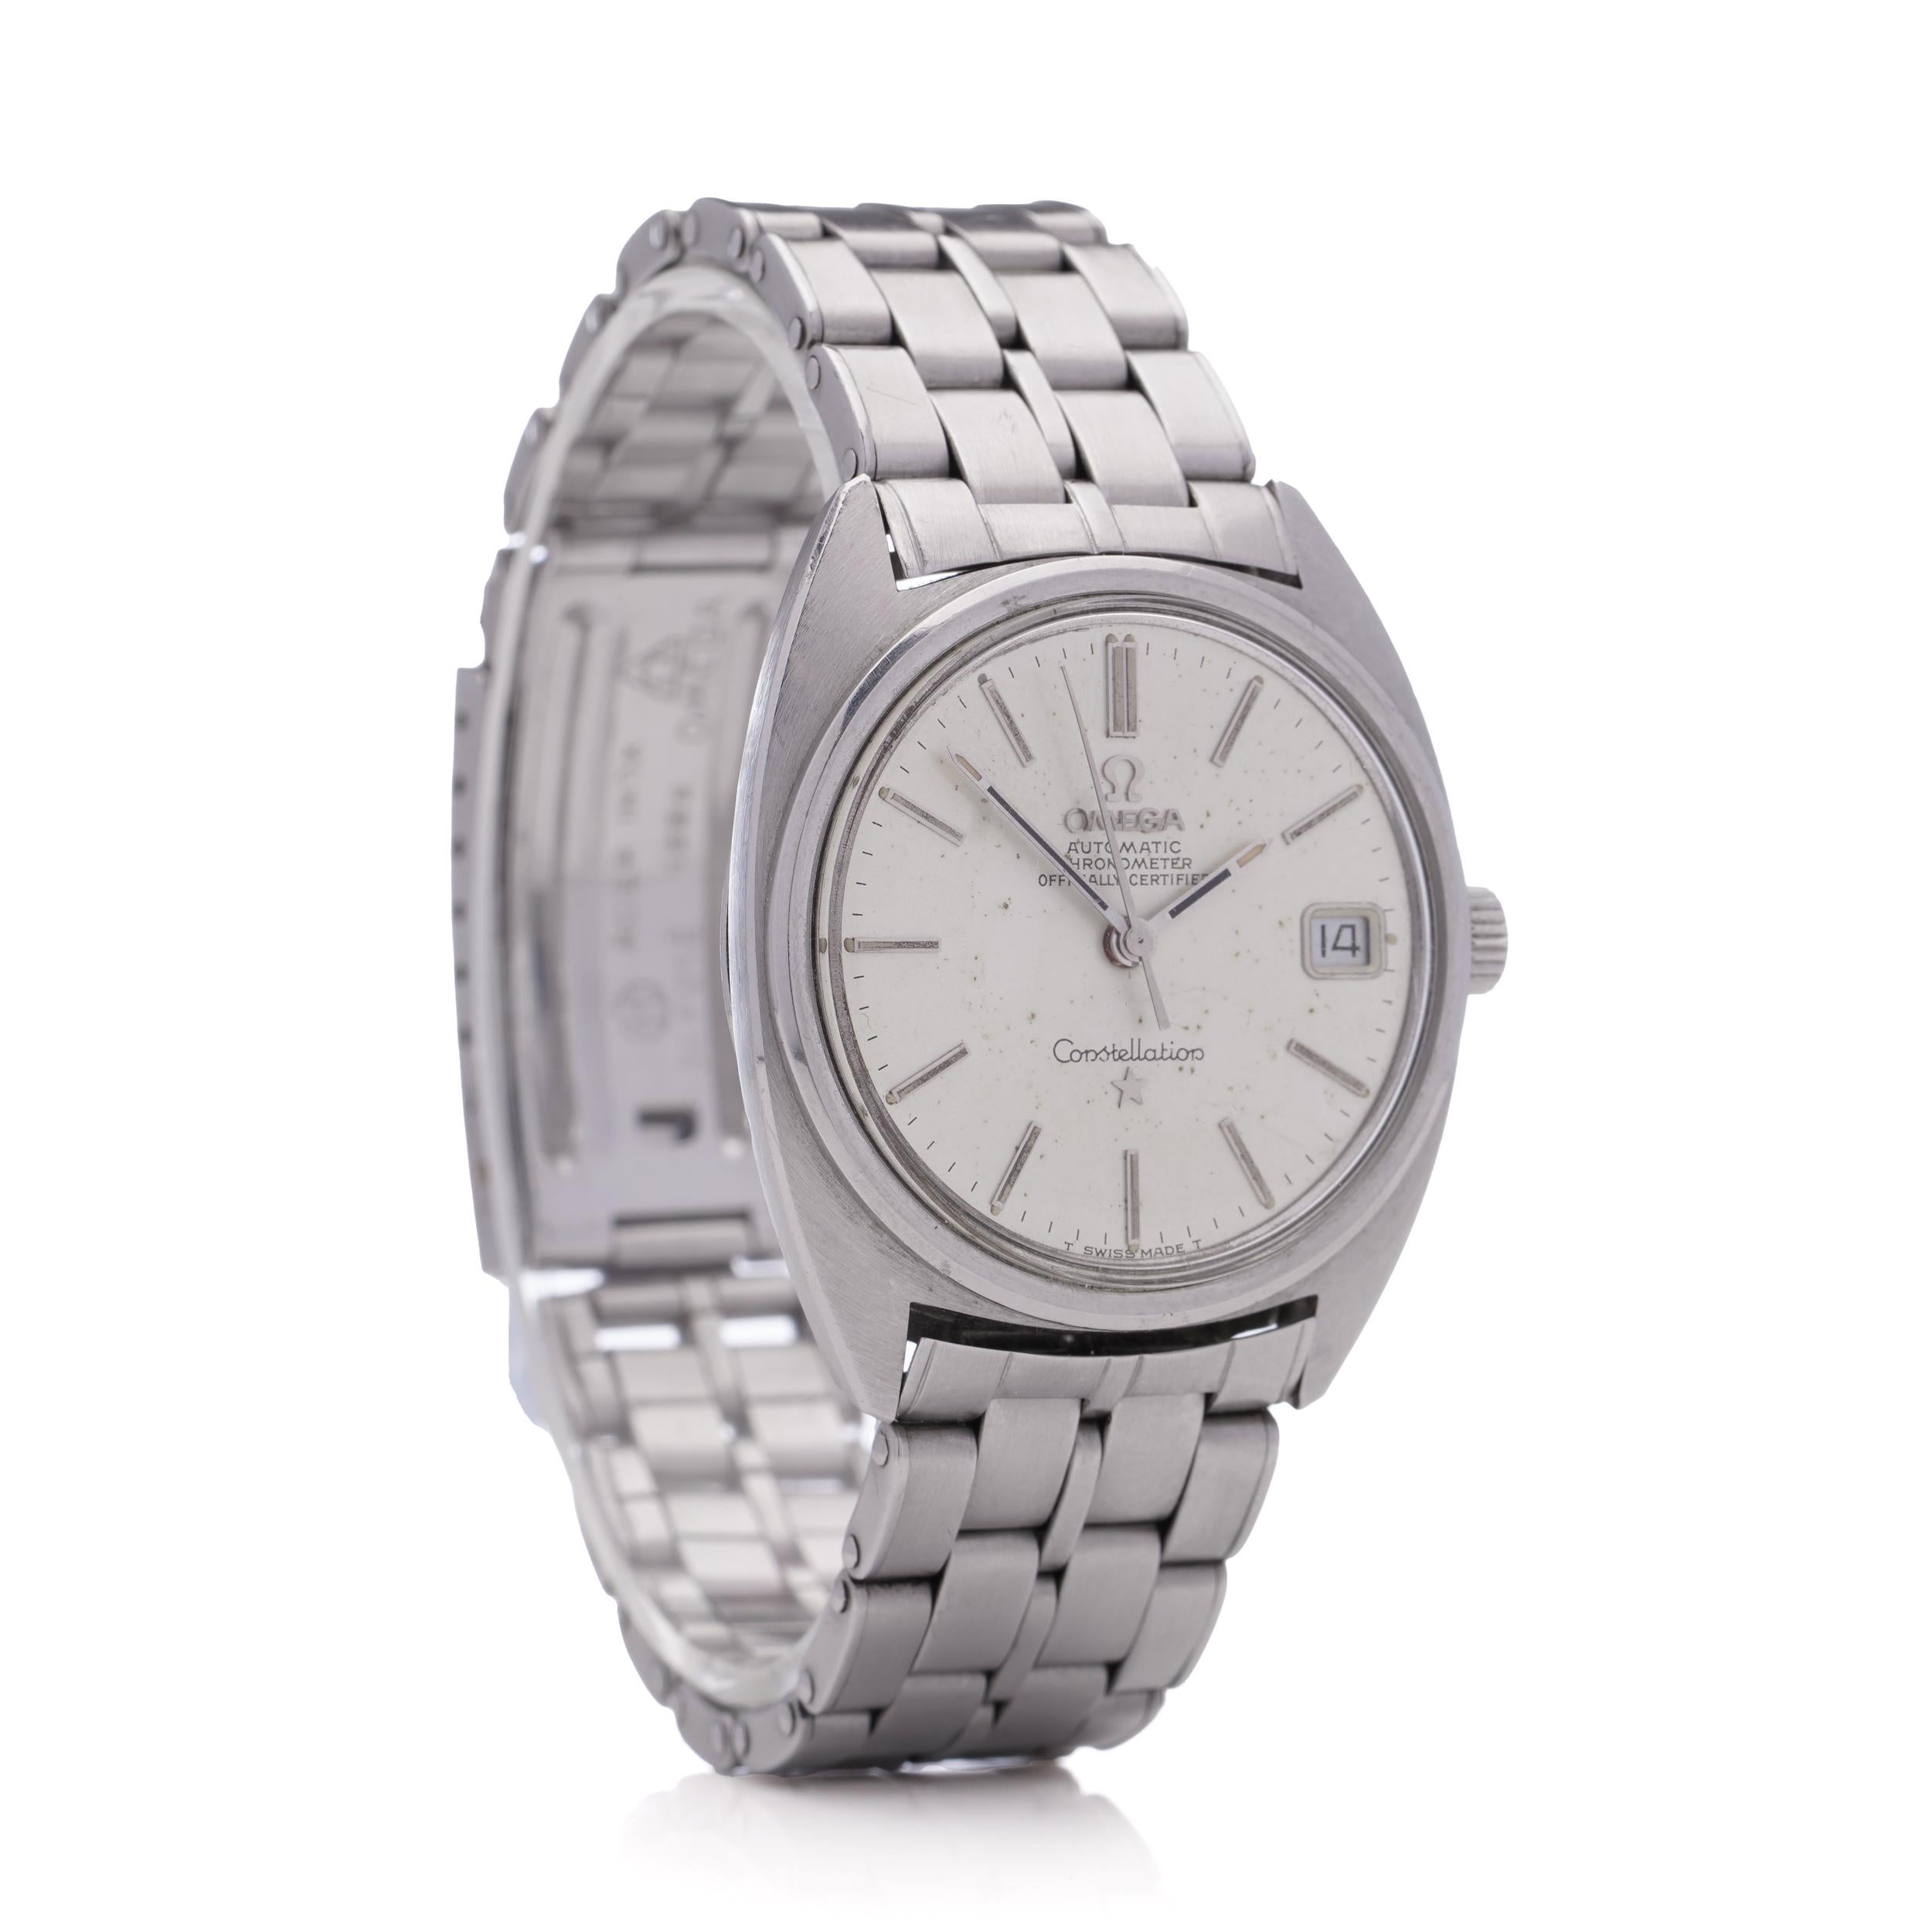 Omega Constellation Chronometer Automatic Vintage Stainless Steel Watch For Sale 4